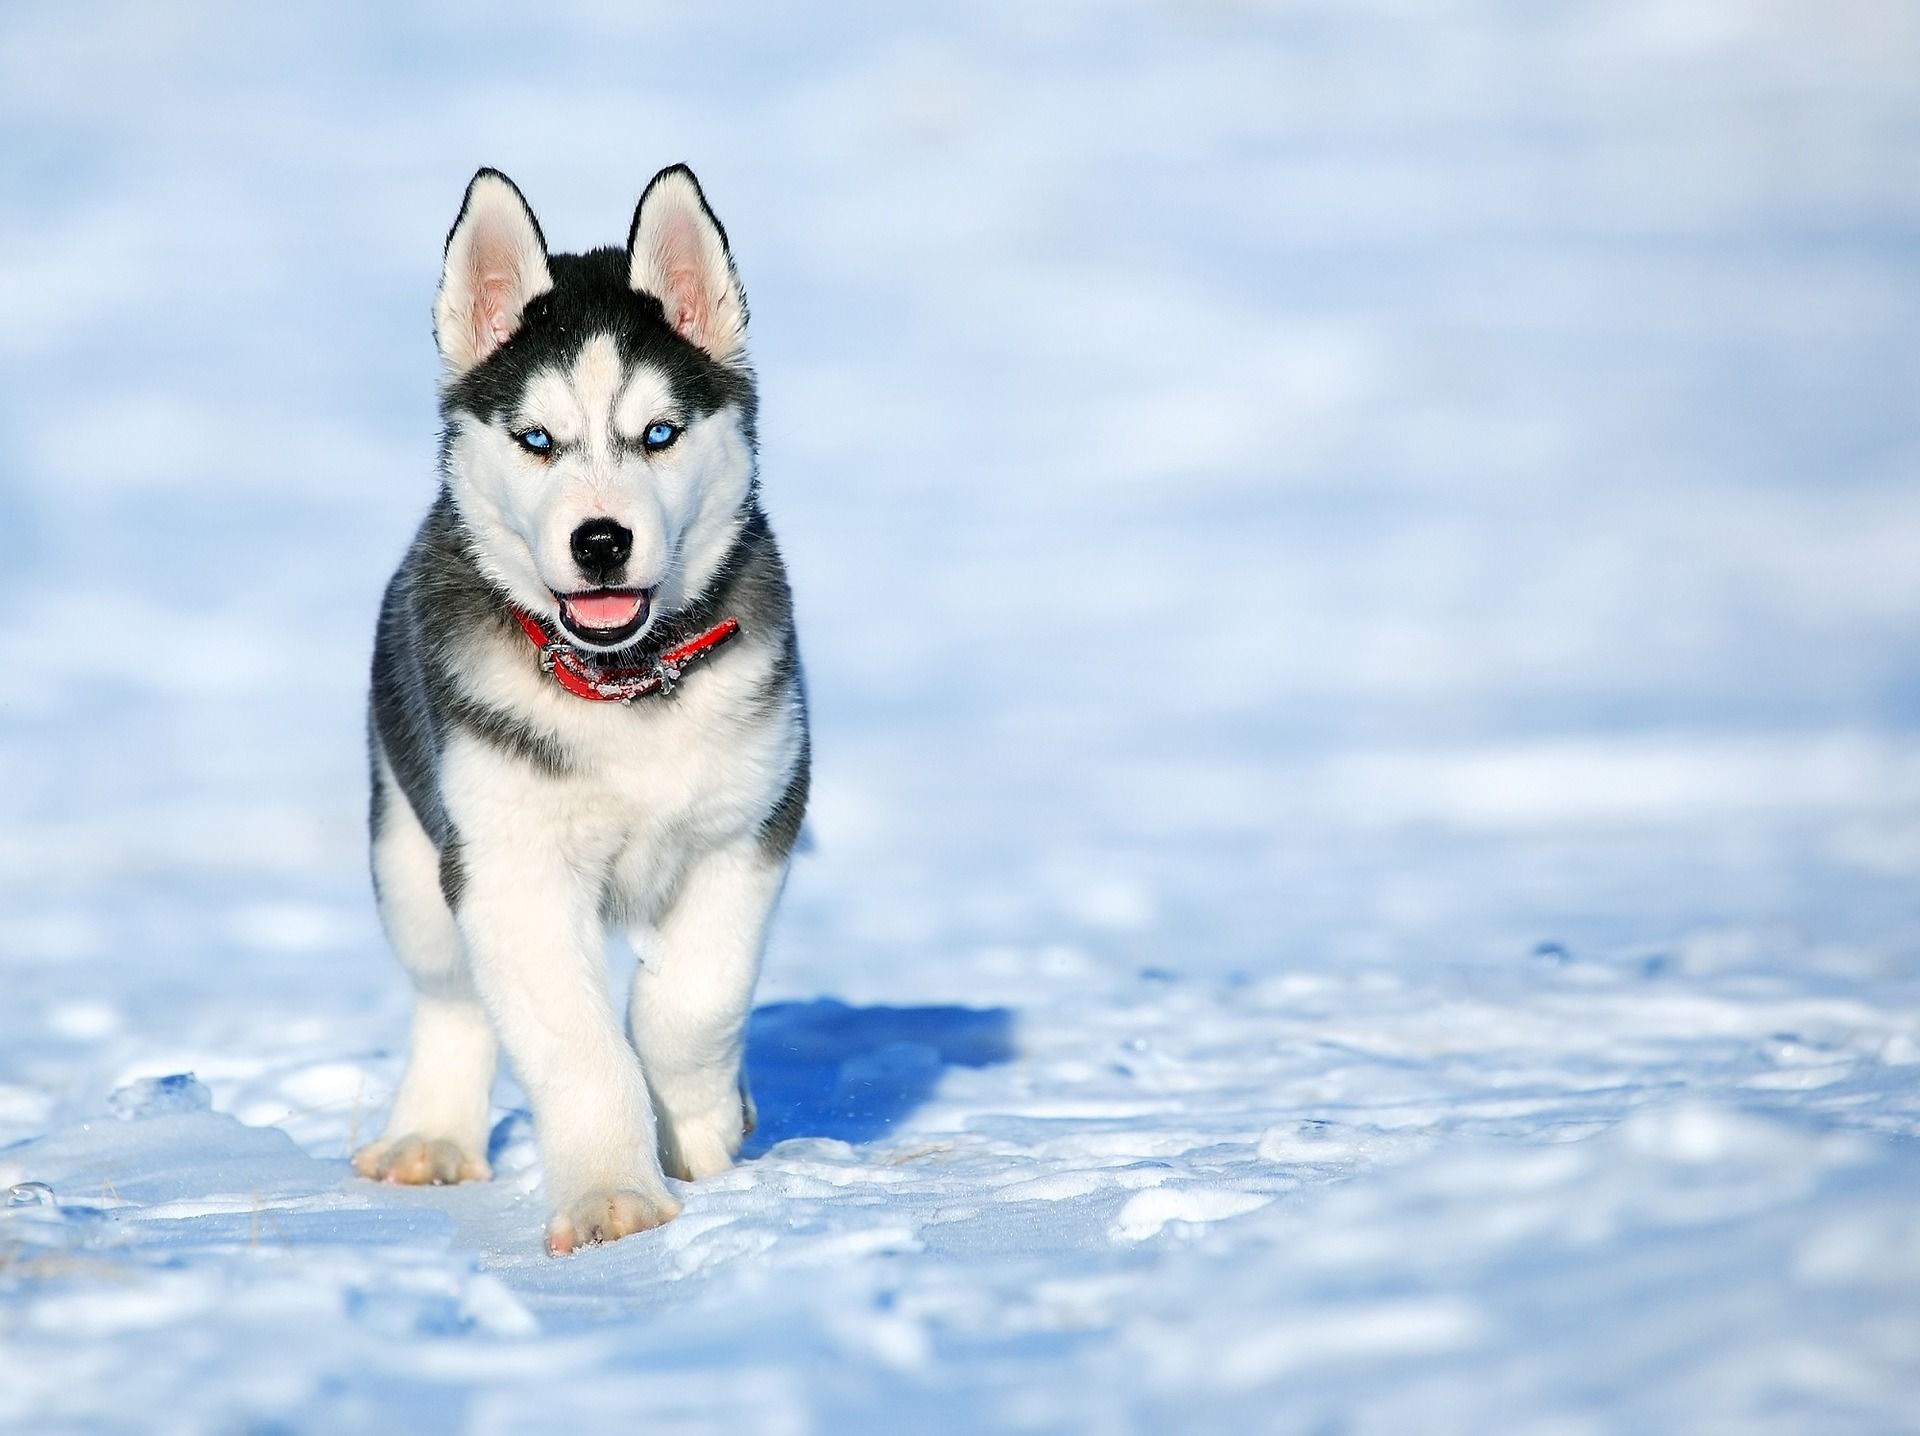 These amazing dogs were bred as sled-dogs